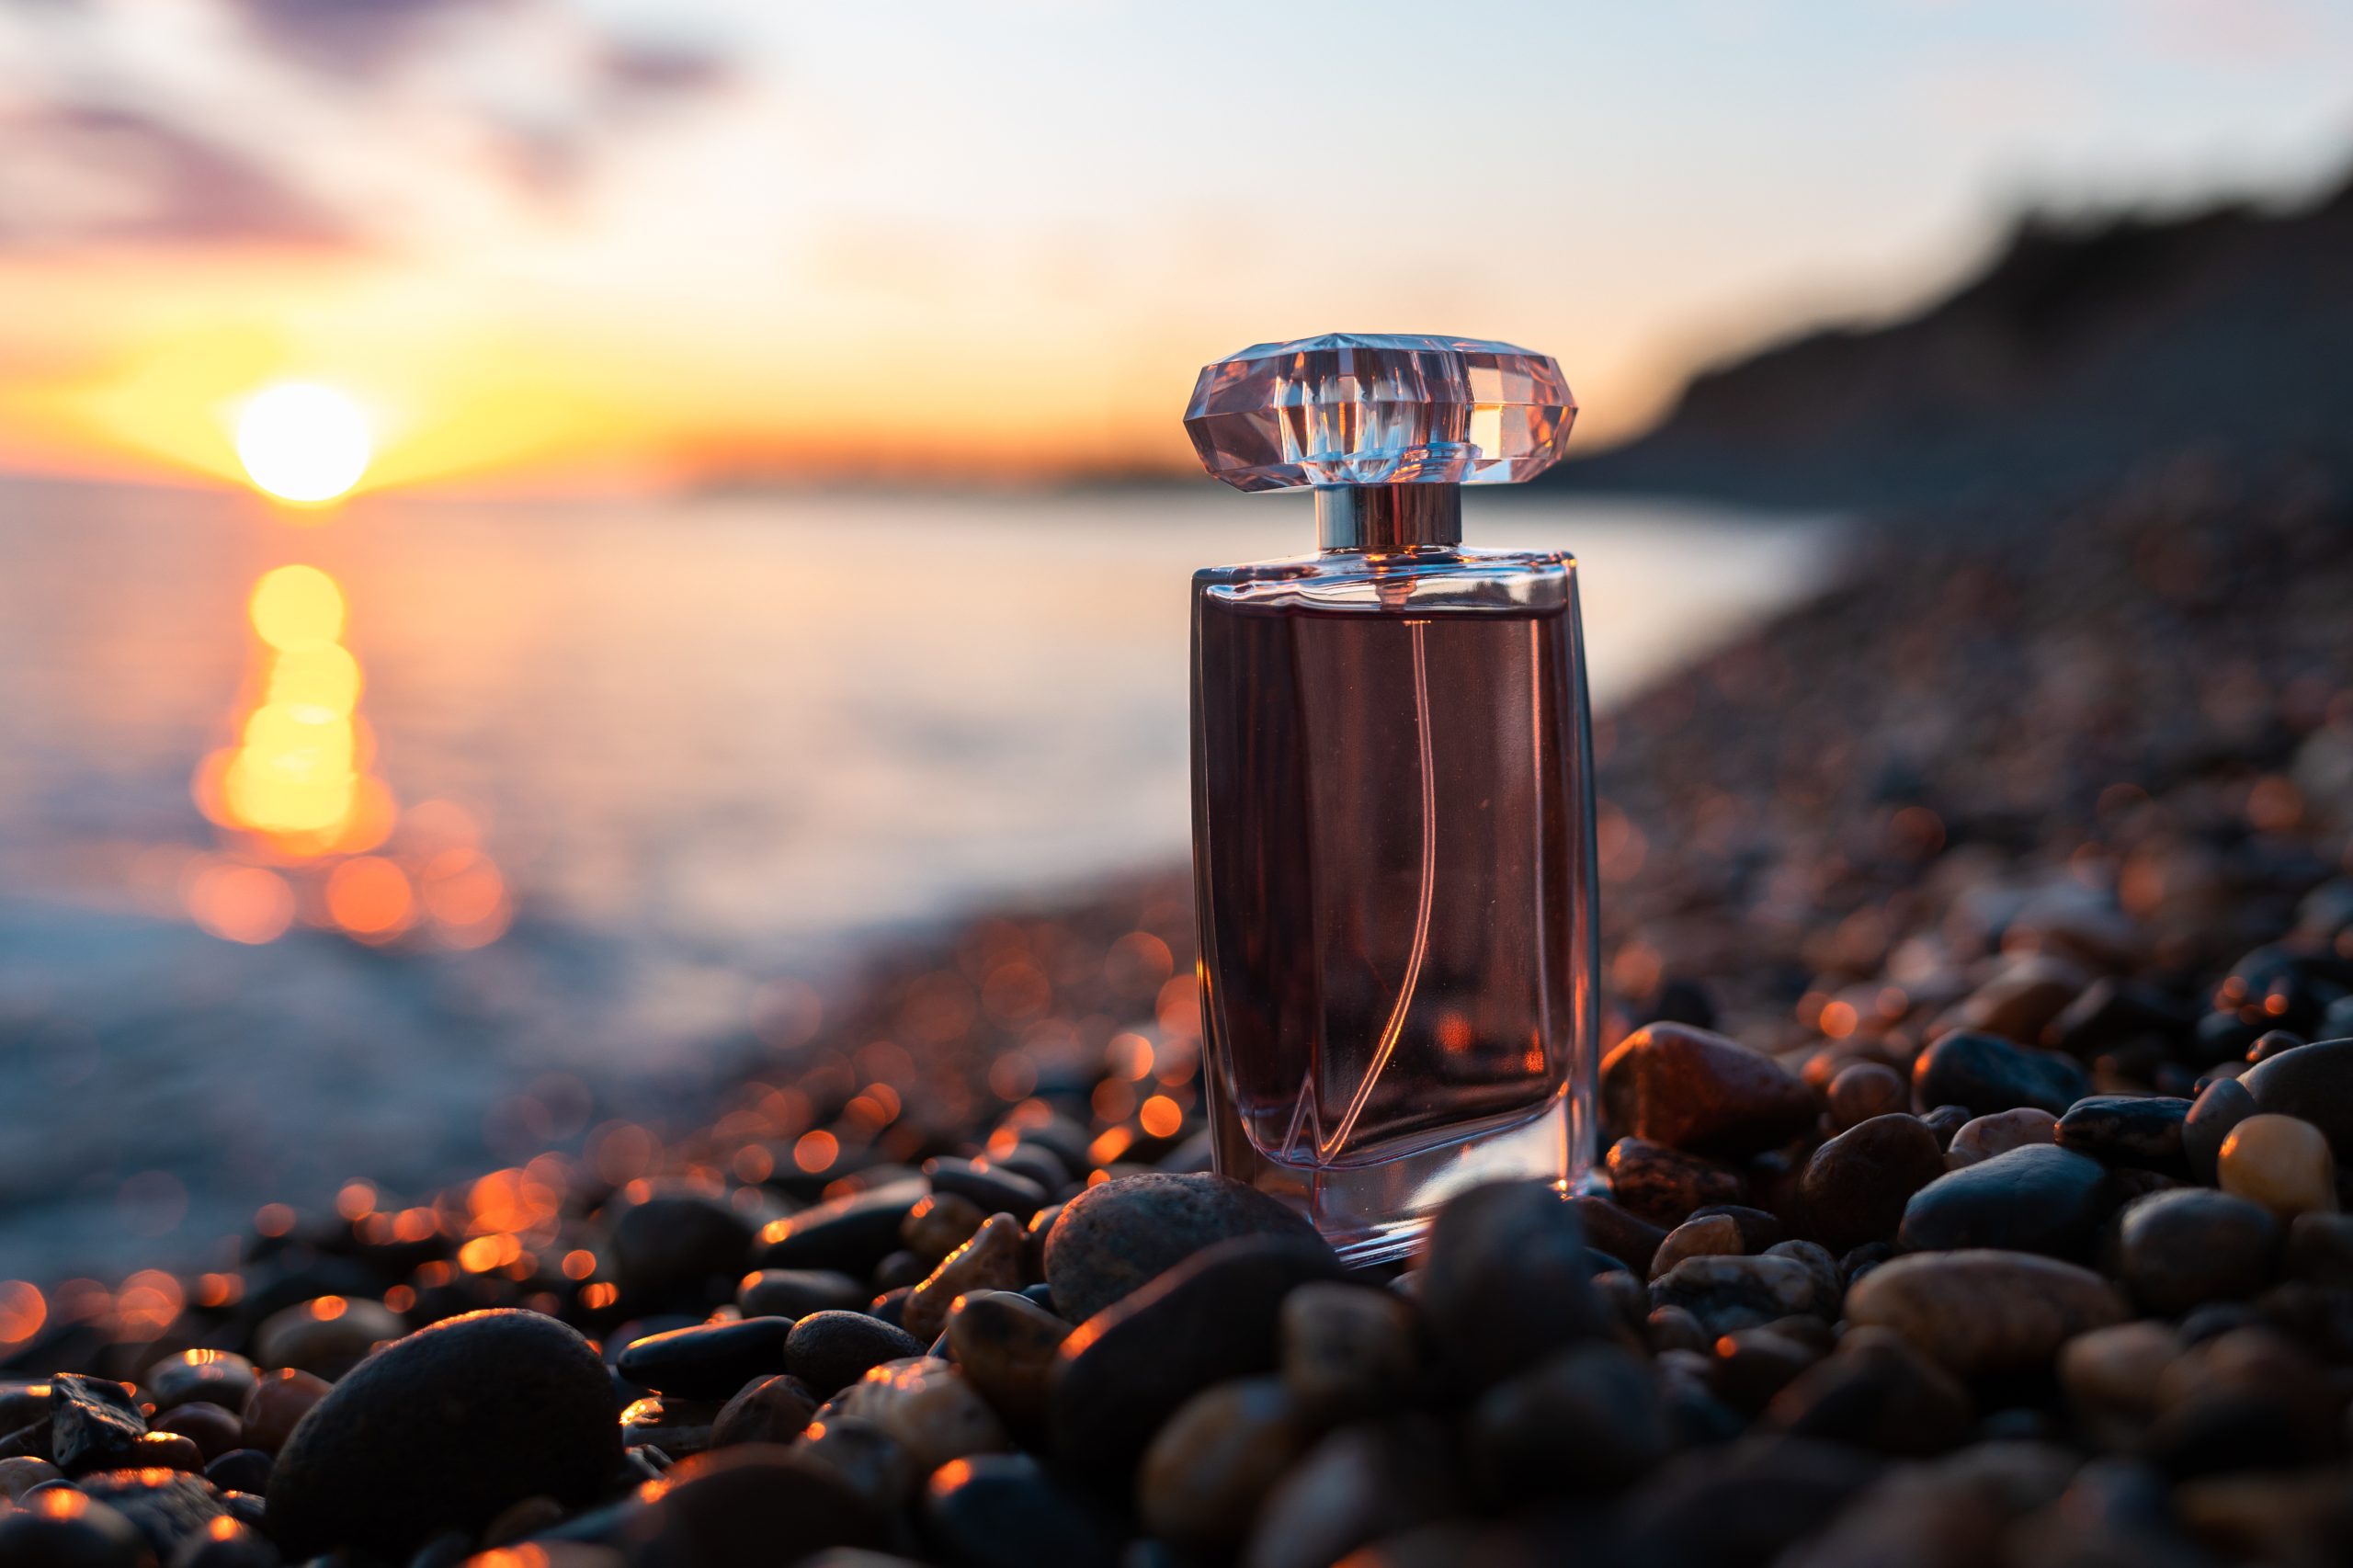 Perfumery and marketing. Lilac glass perfume bottle on a pebble beach, on the seashore, close-up. Sunset on the background. Luxury Perfume presentation concept